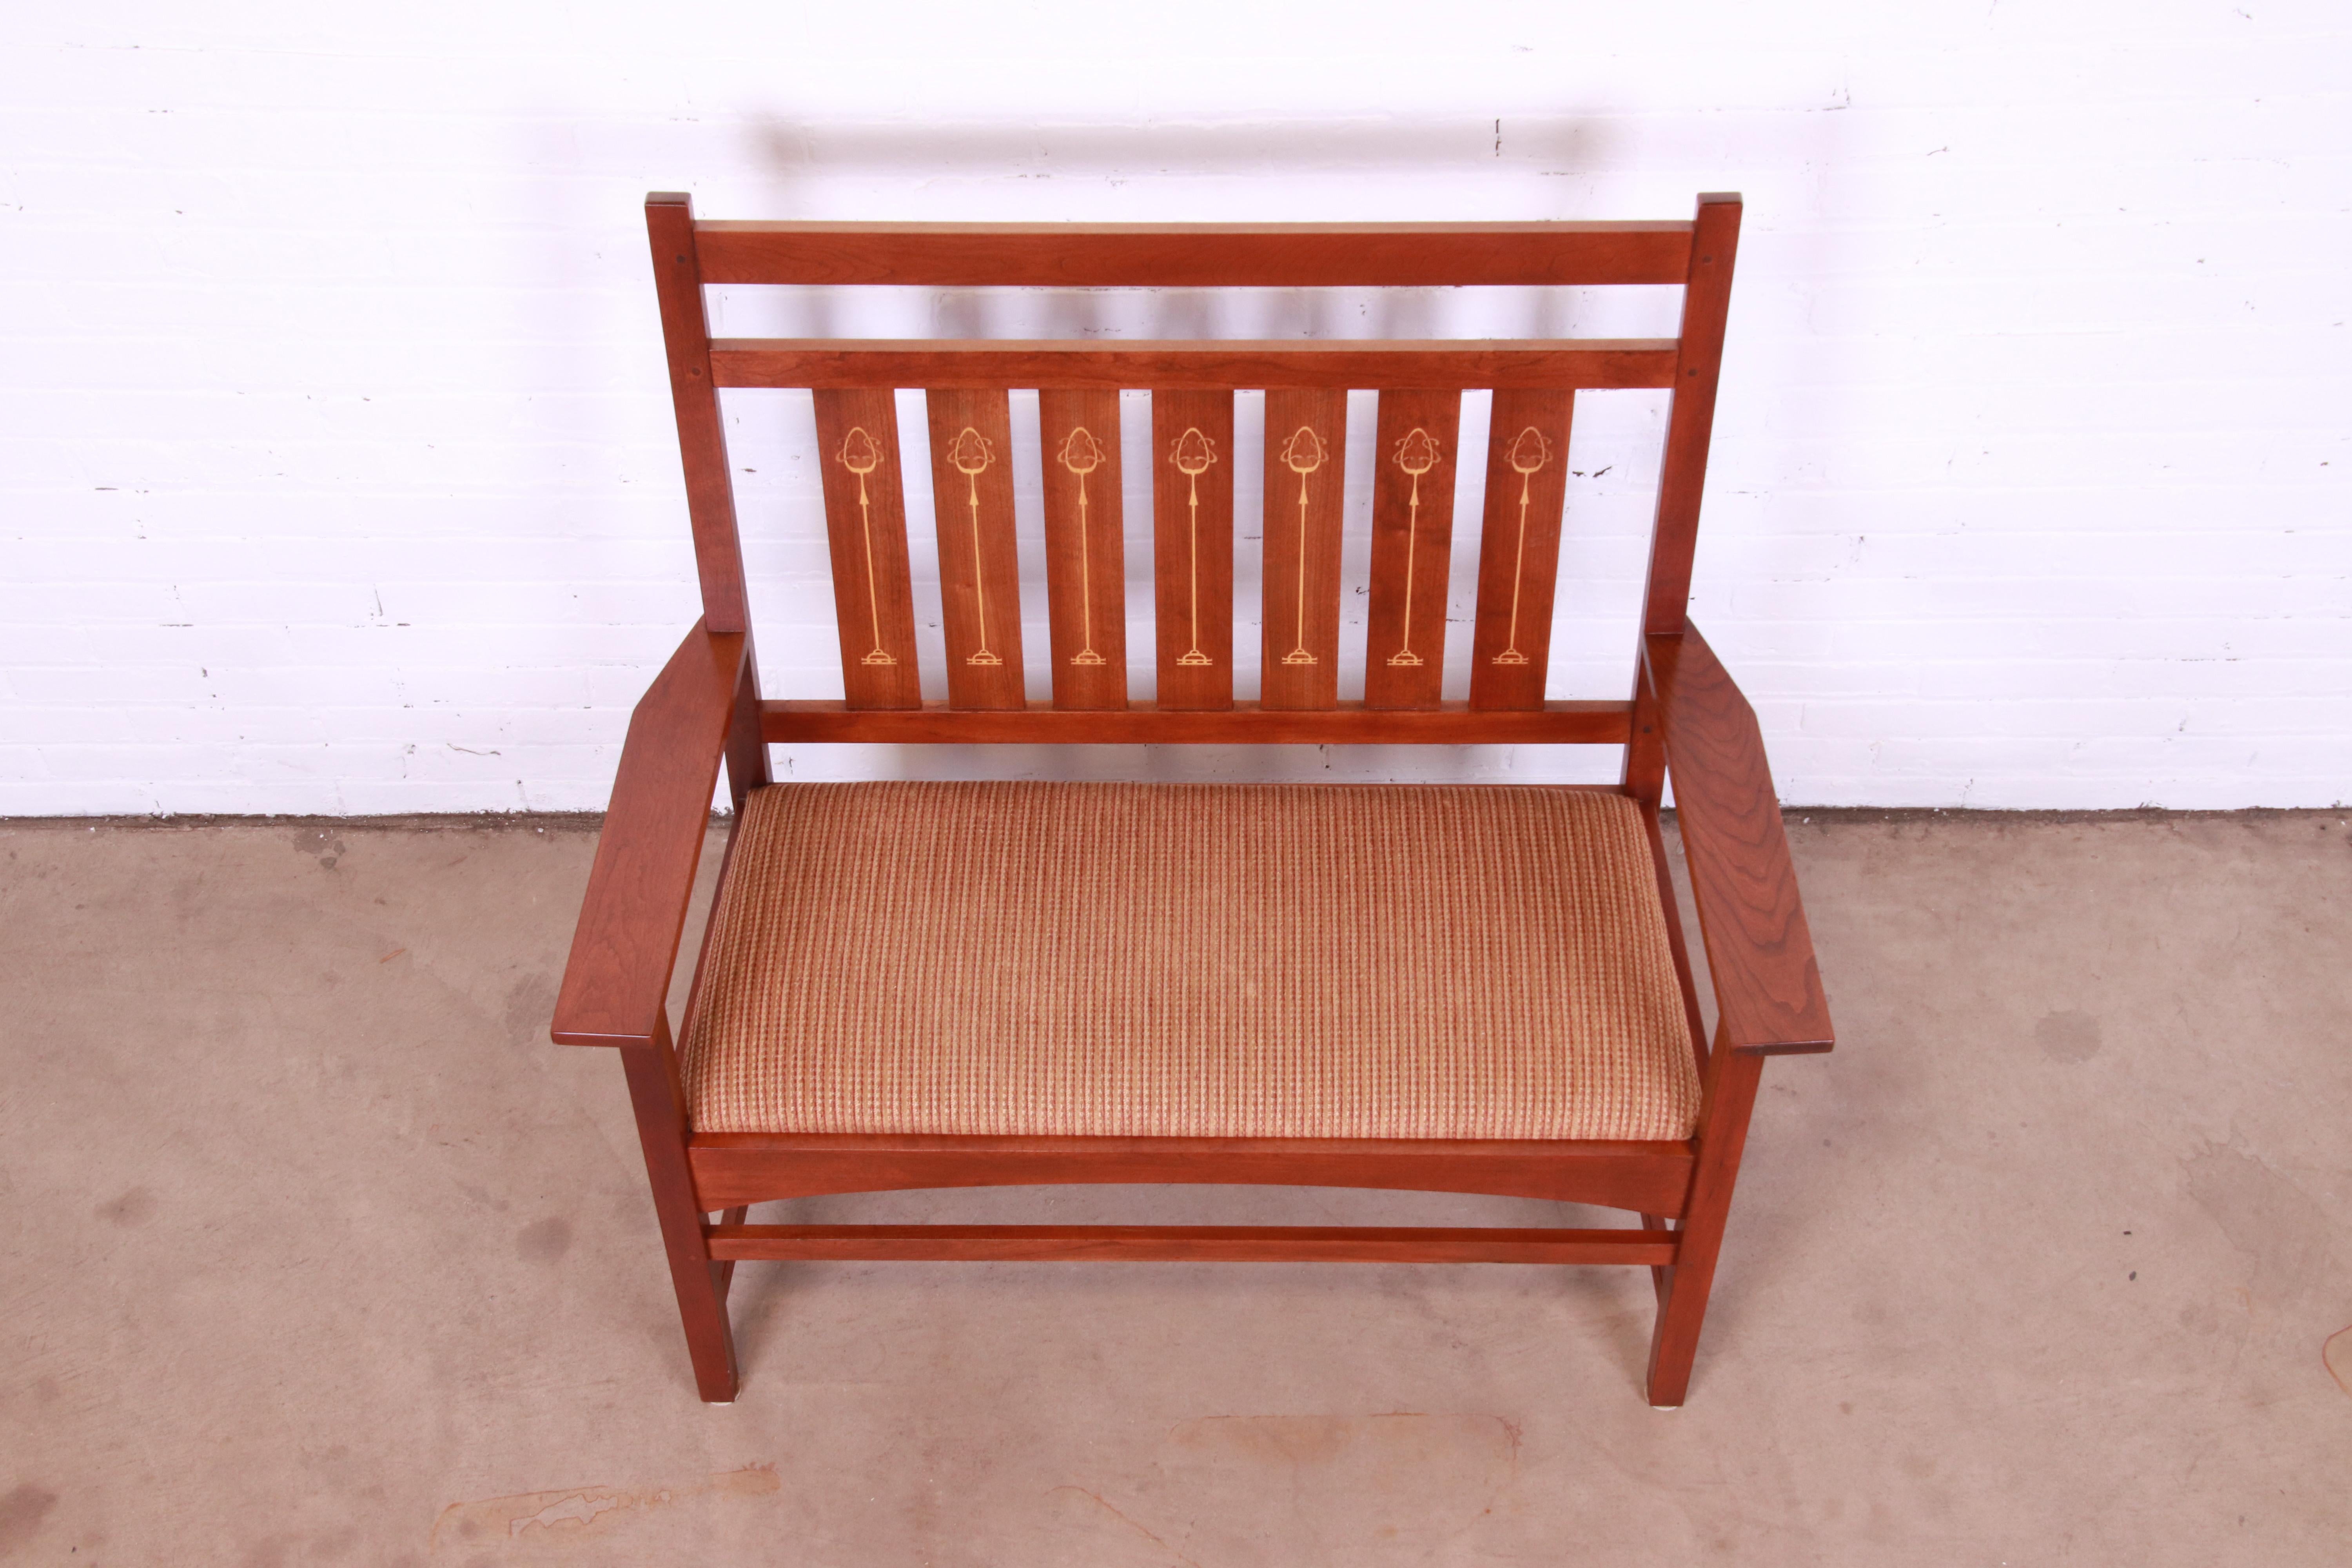 American Stickley Harvey Ellis Collection Inlaid Cherry Wood Bench or Settee